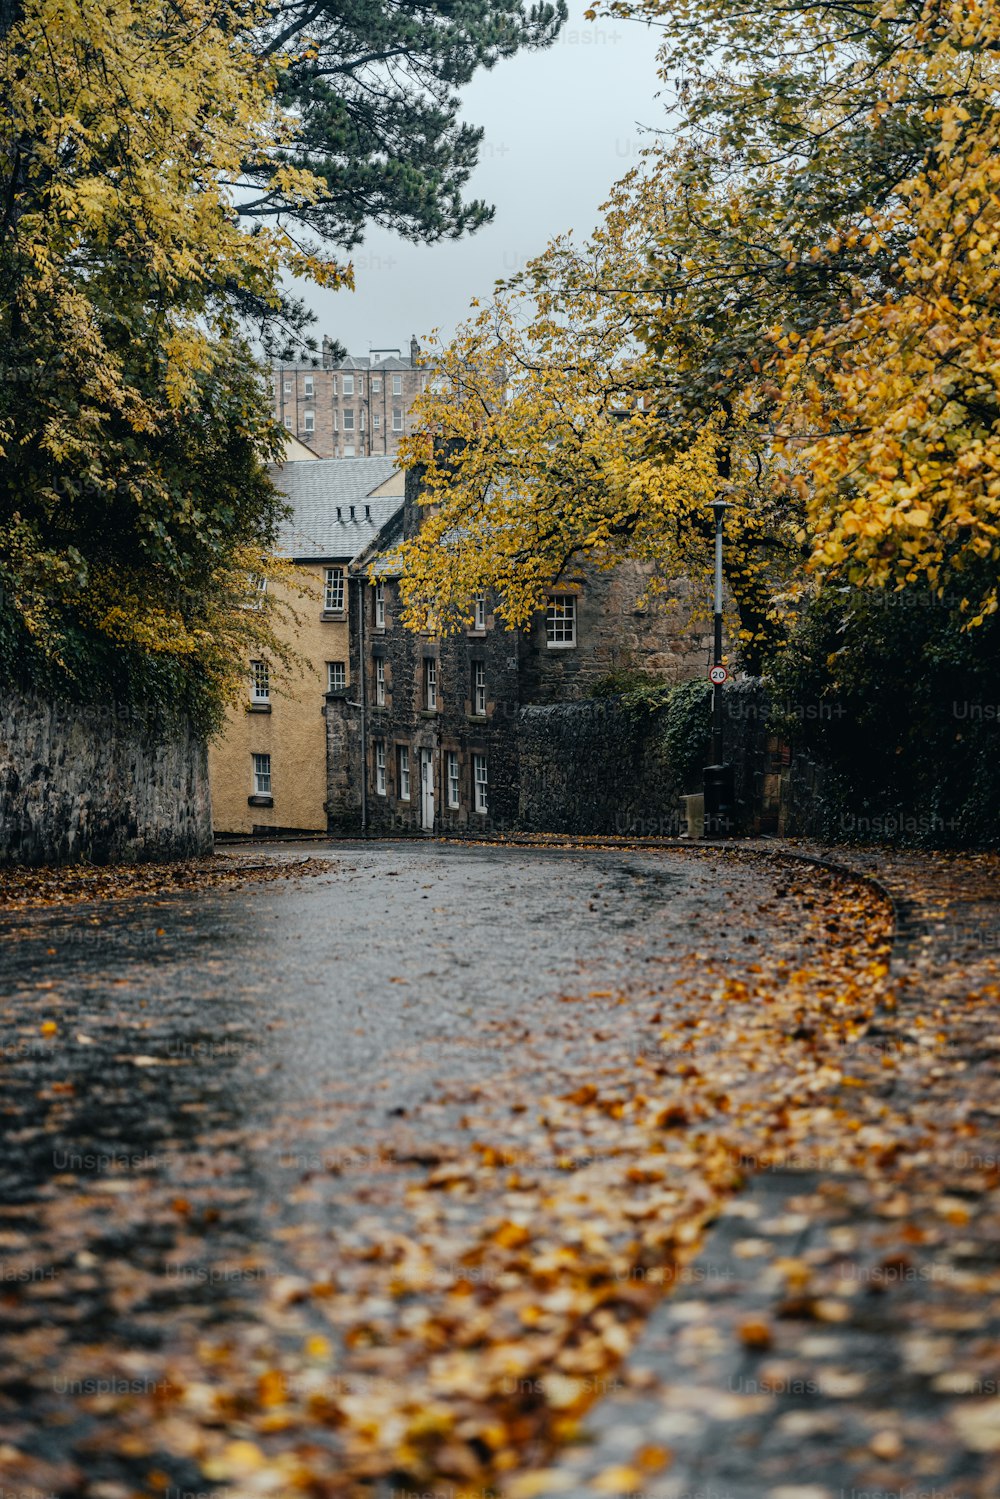 a wet street with lots of leaves on the ground